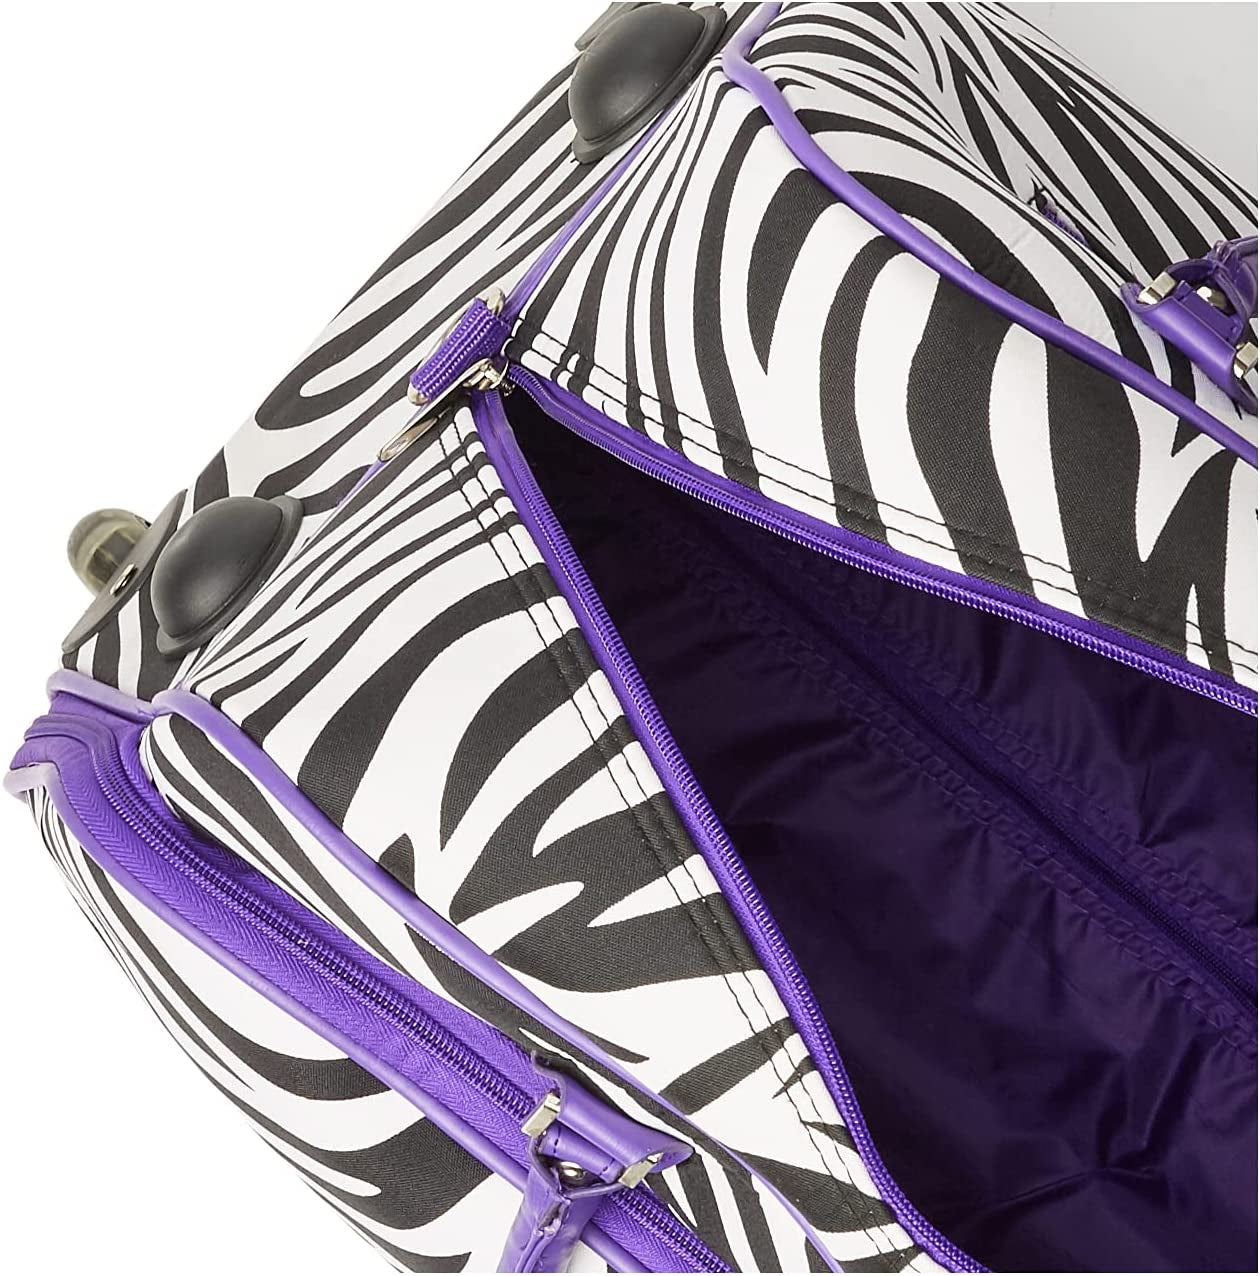 CalBags Zebra 21" Rolling Carry-On Duffel Bags